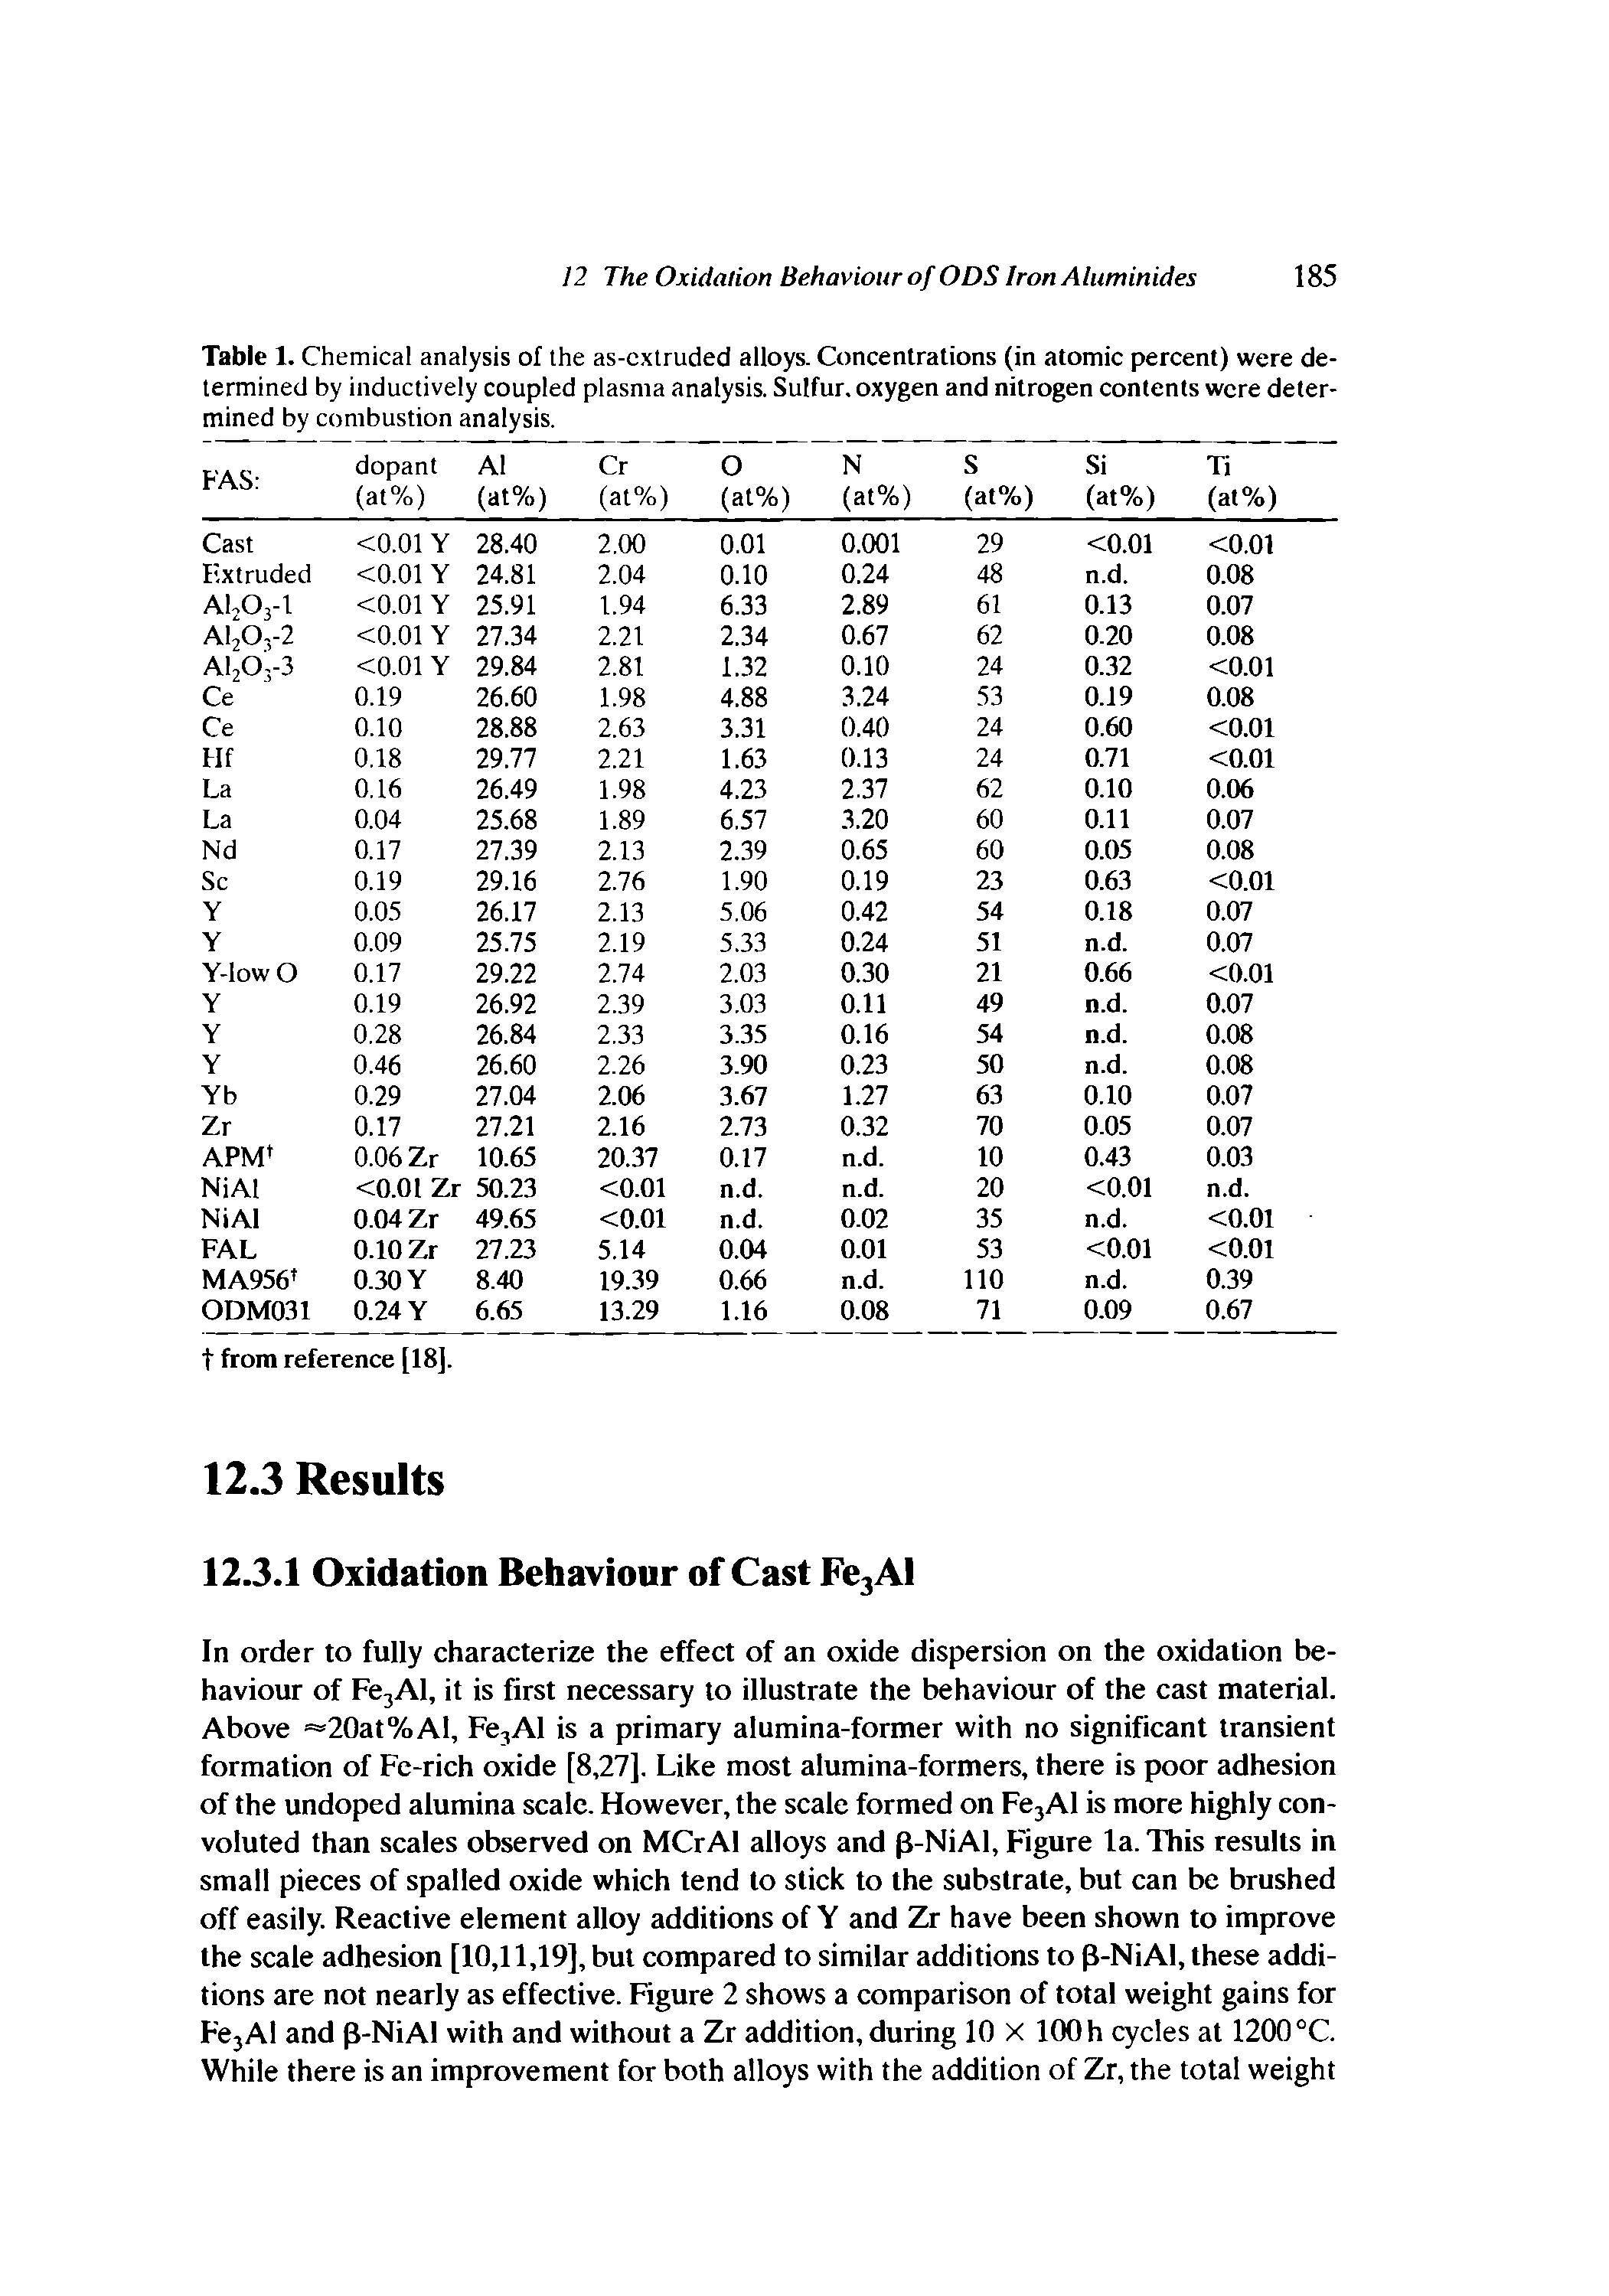 Table 1. Chemical analysis of the as-extruded alloys. Concentrations (in atomic percent) were determined by inductively coupled plasma analysis. Sulfur, oxygen and nitrogen contents were determined by combustion analysis.